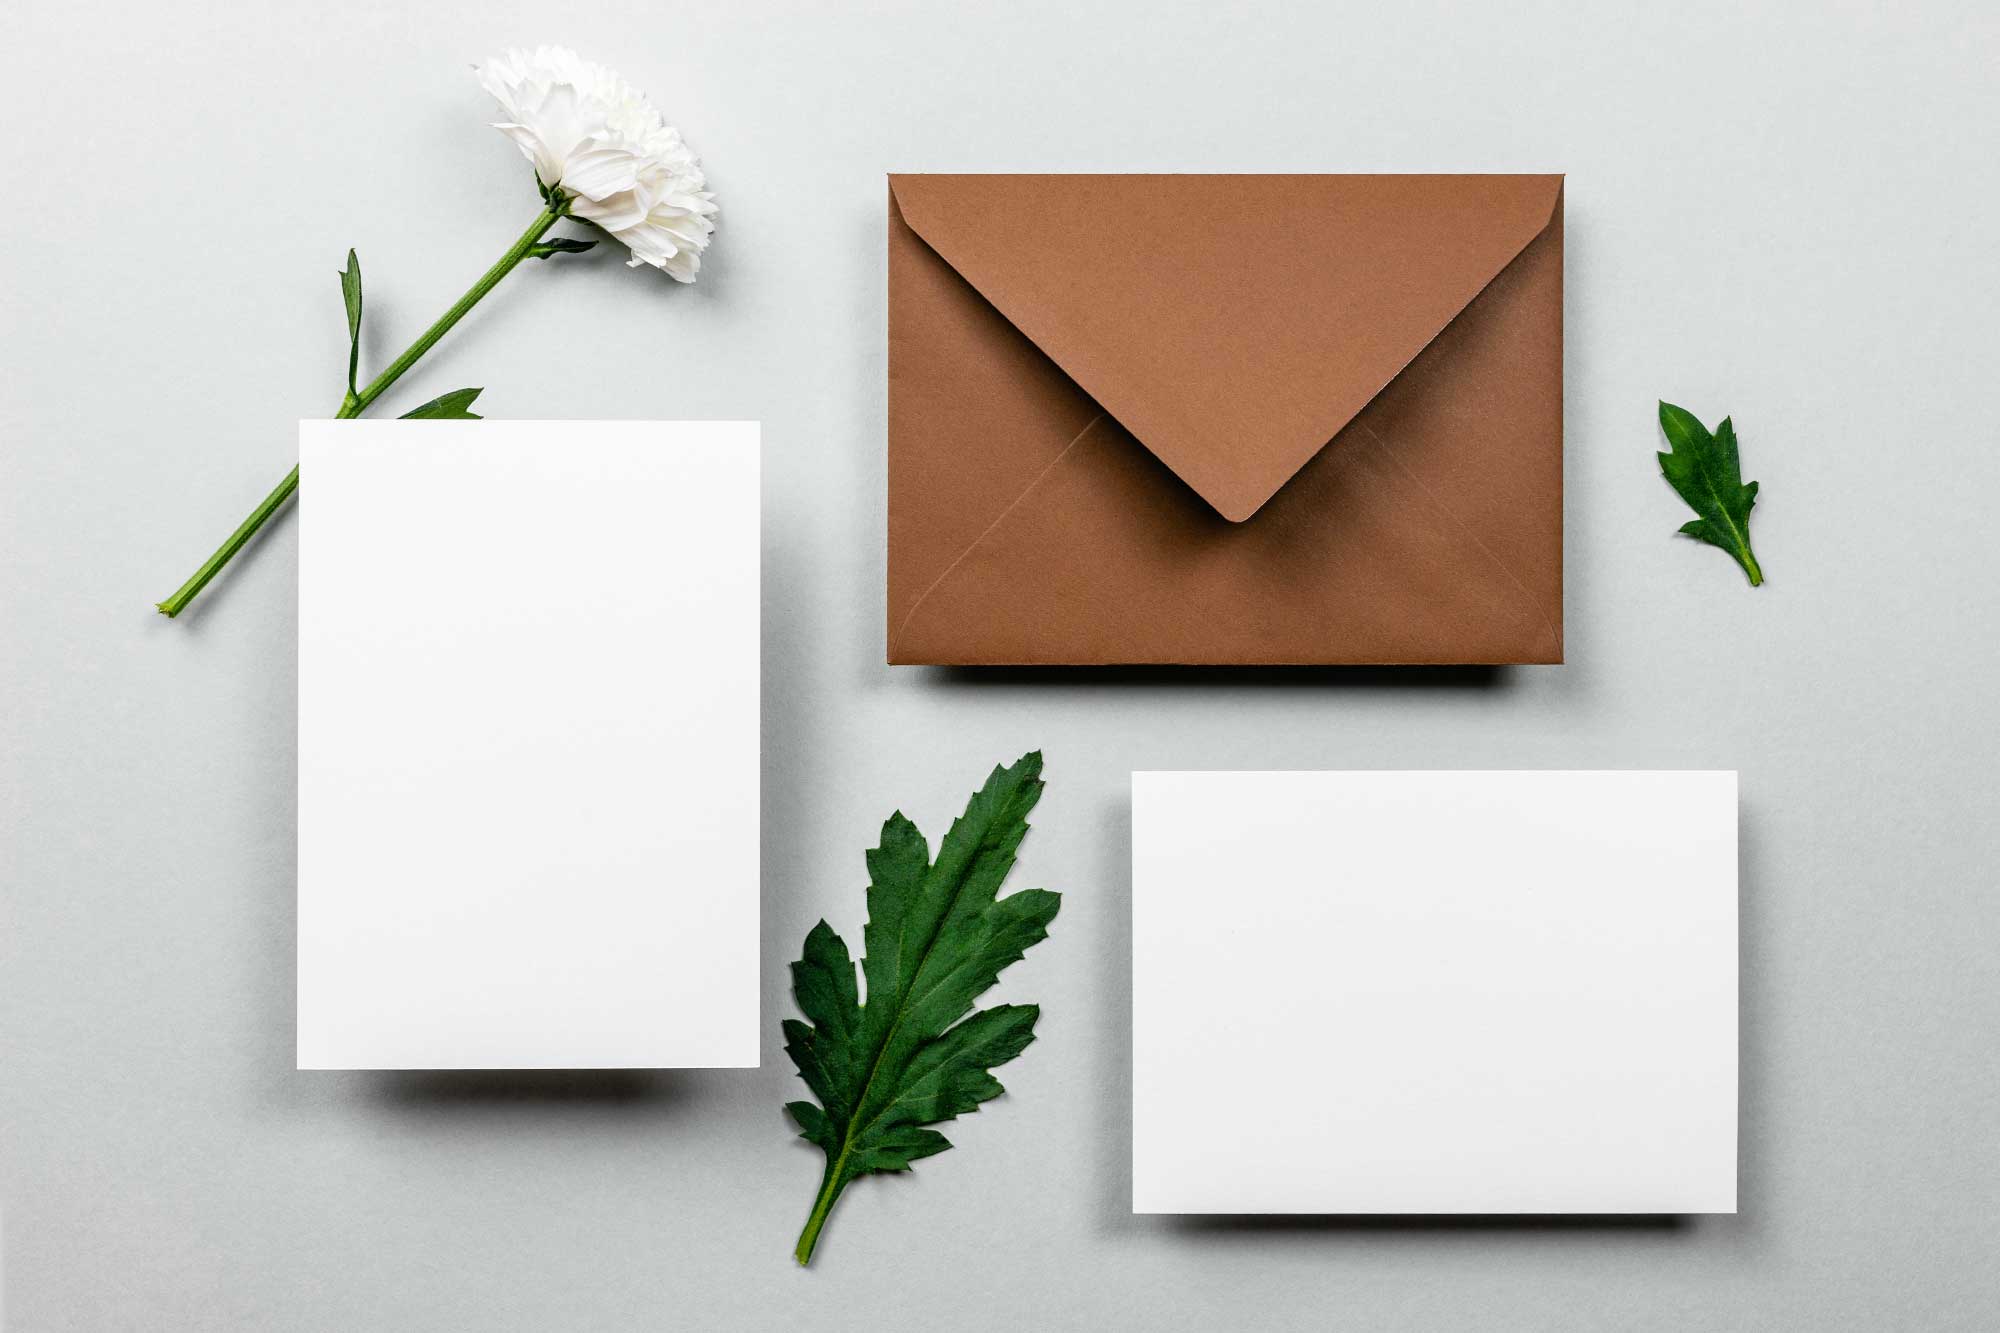 Envelope and notes